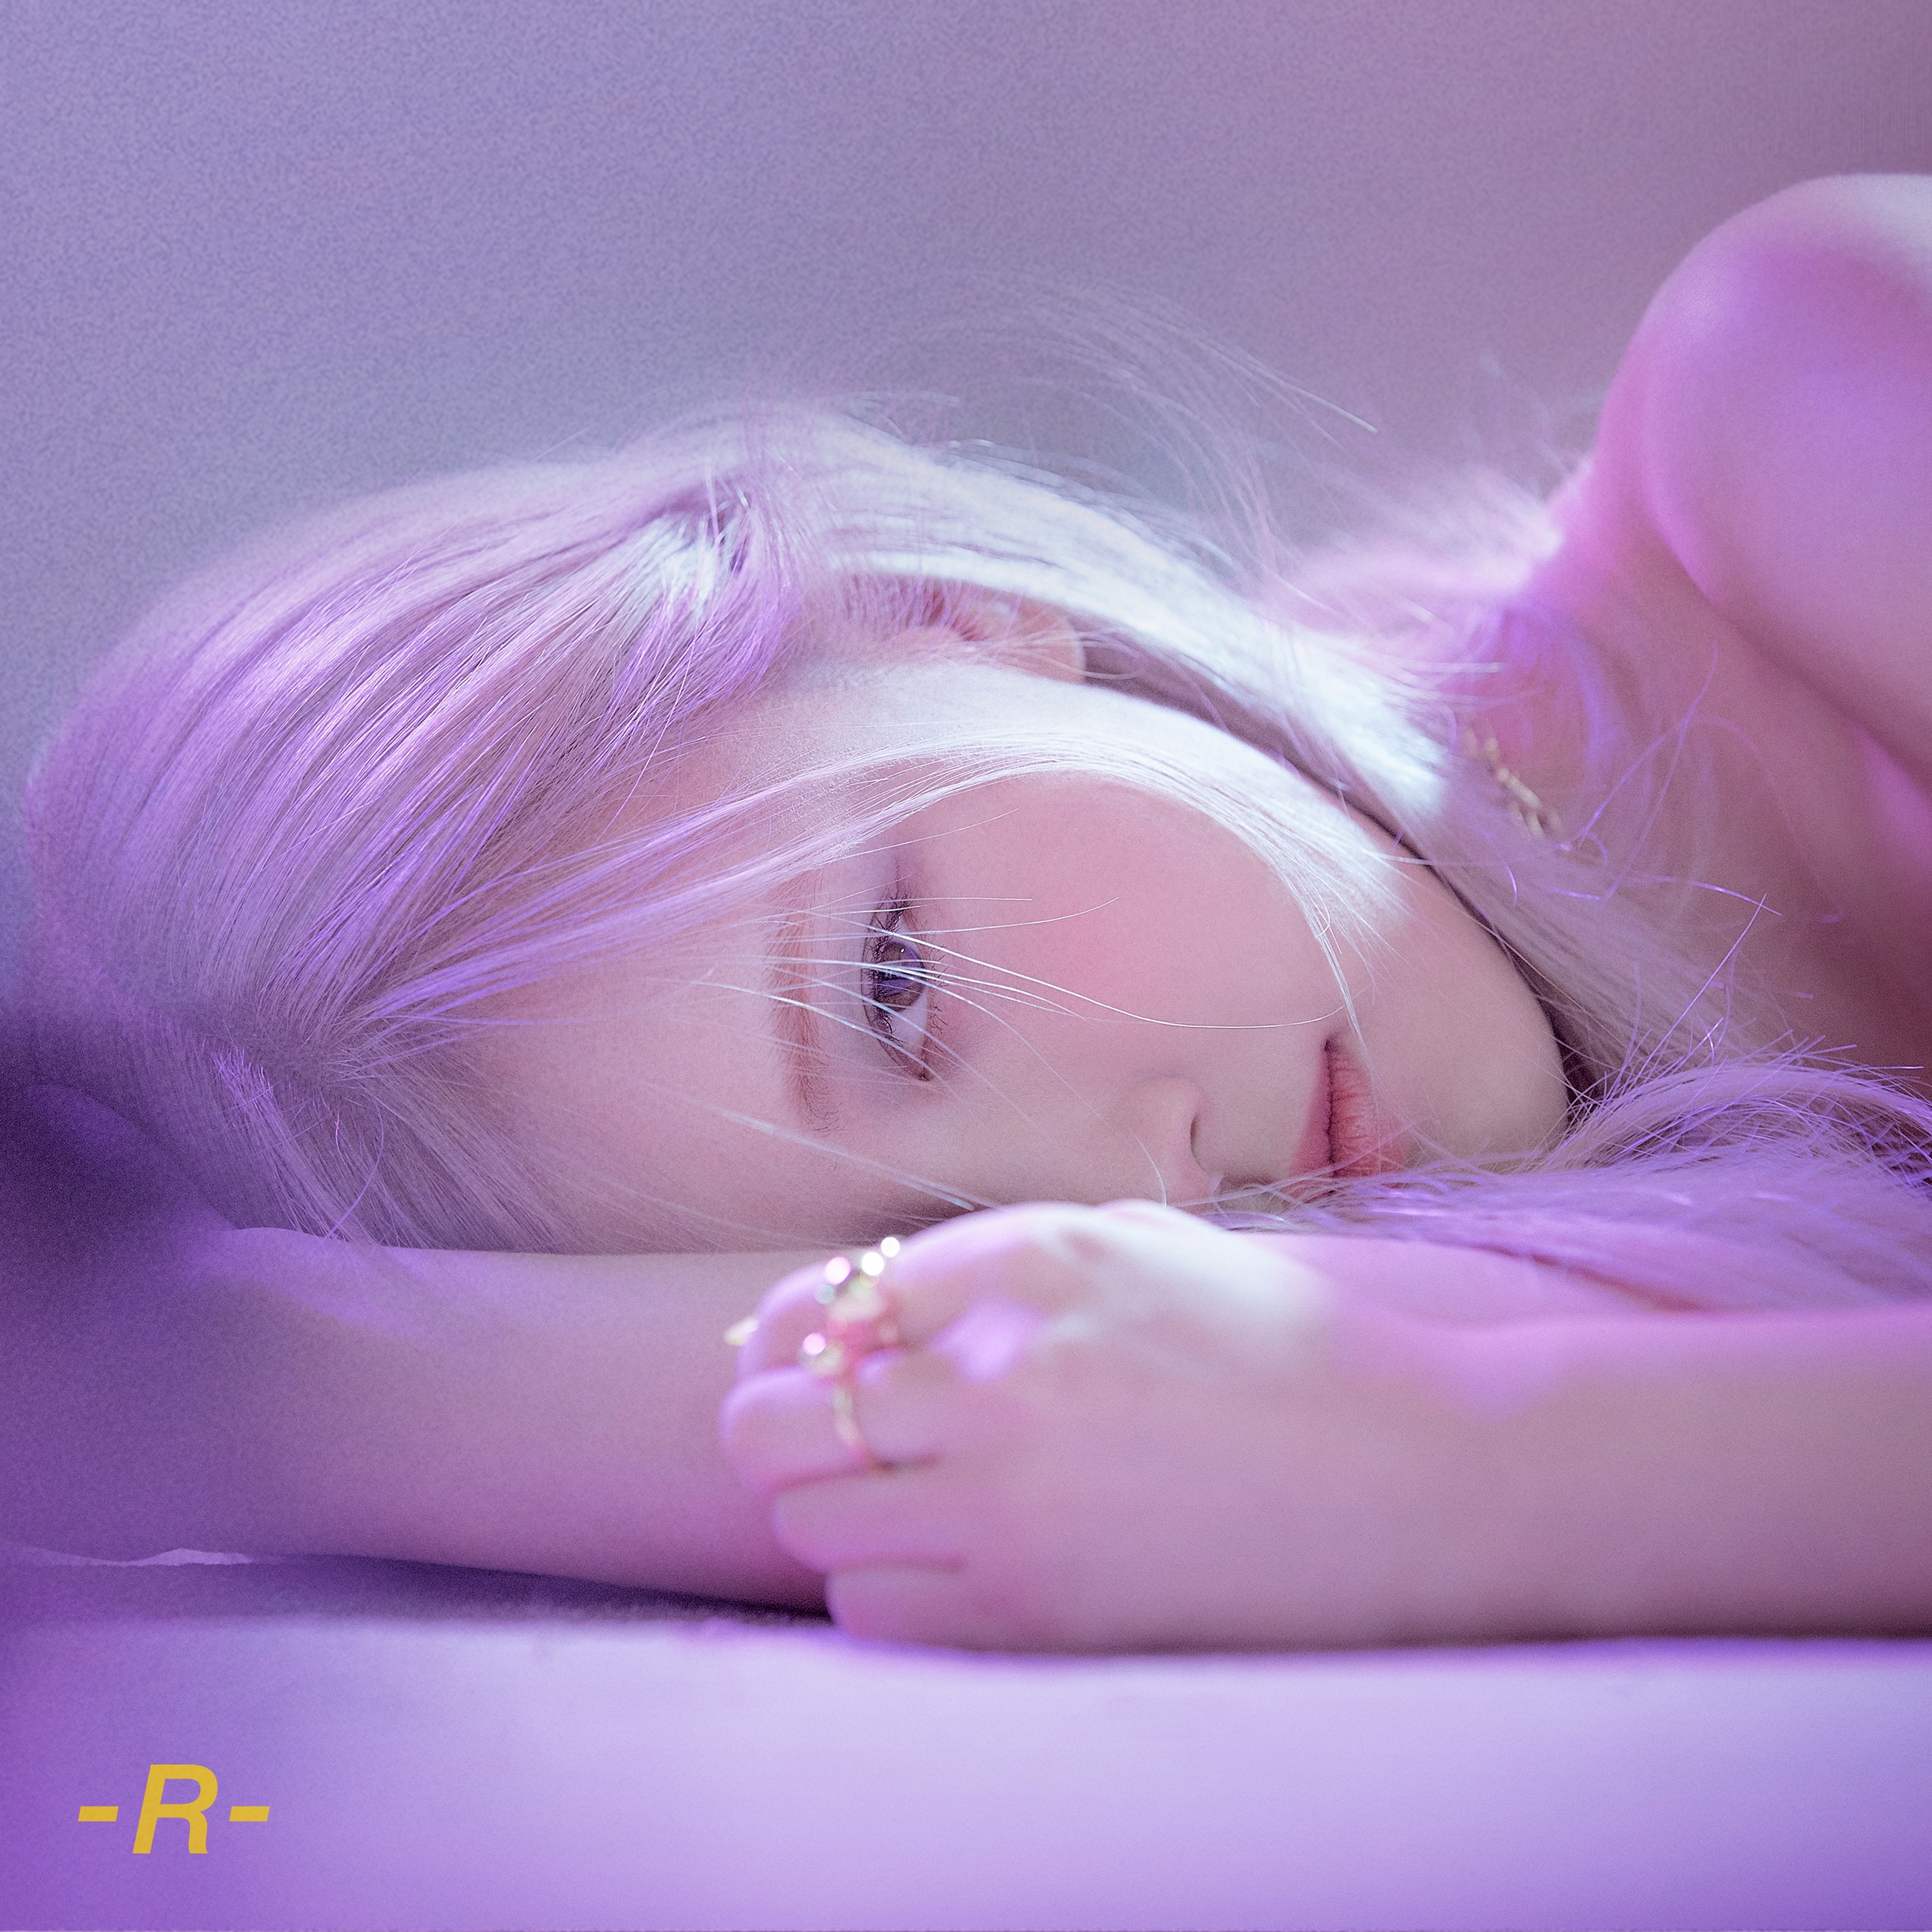 HD wallpaper, On The Ground, 2021, Rose, Purple Aesthetic